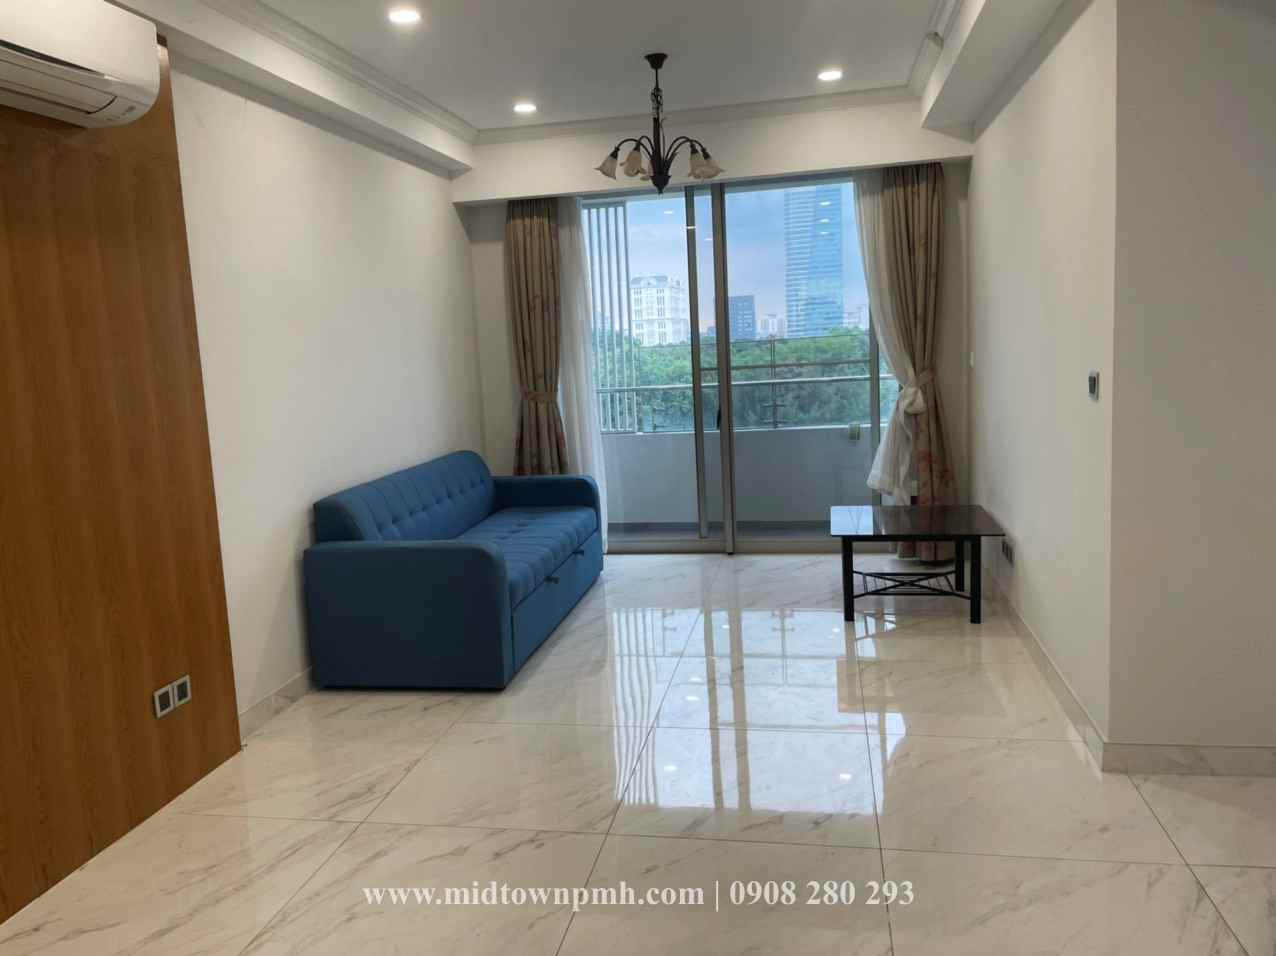 3br apartment for sale in Midtown having car parking only 8.9B VND